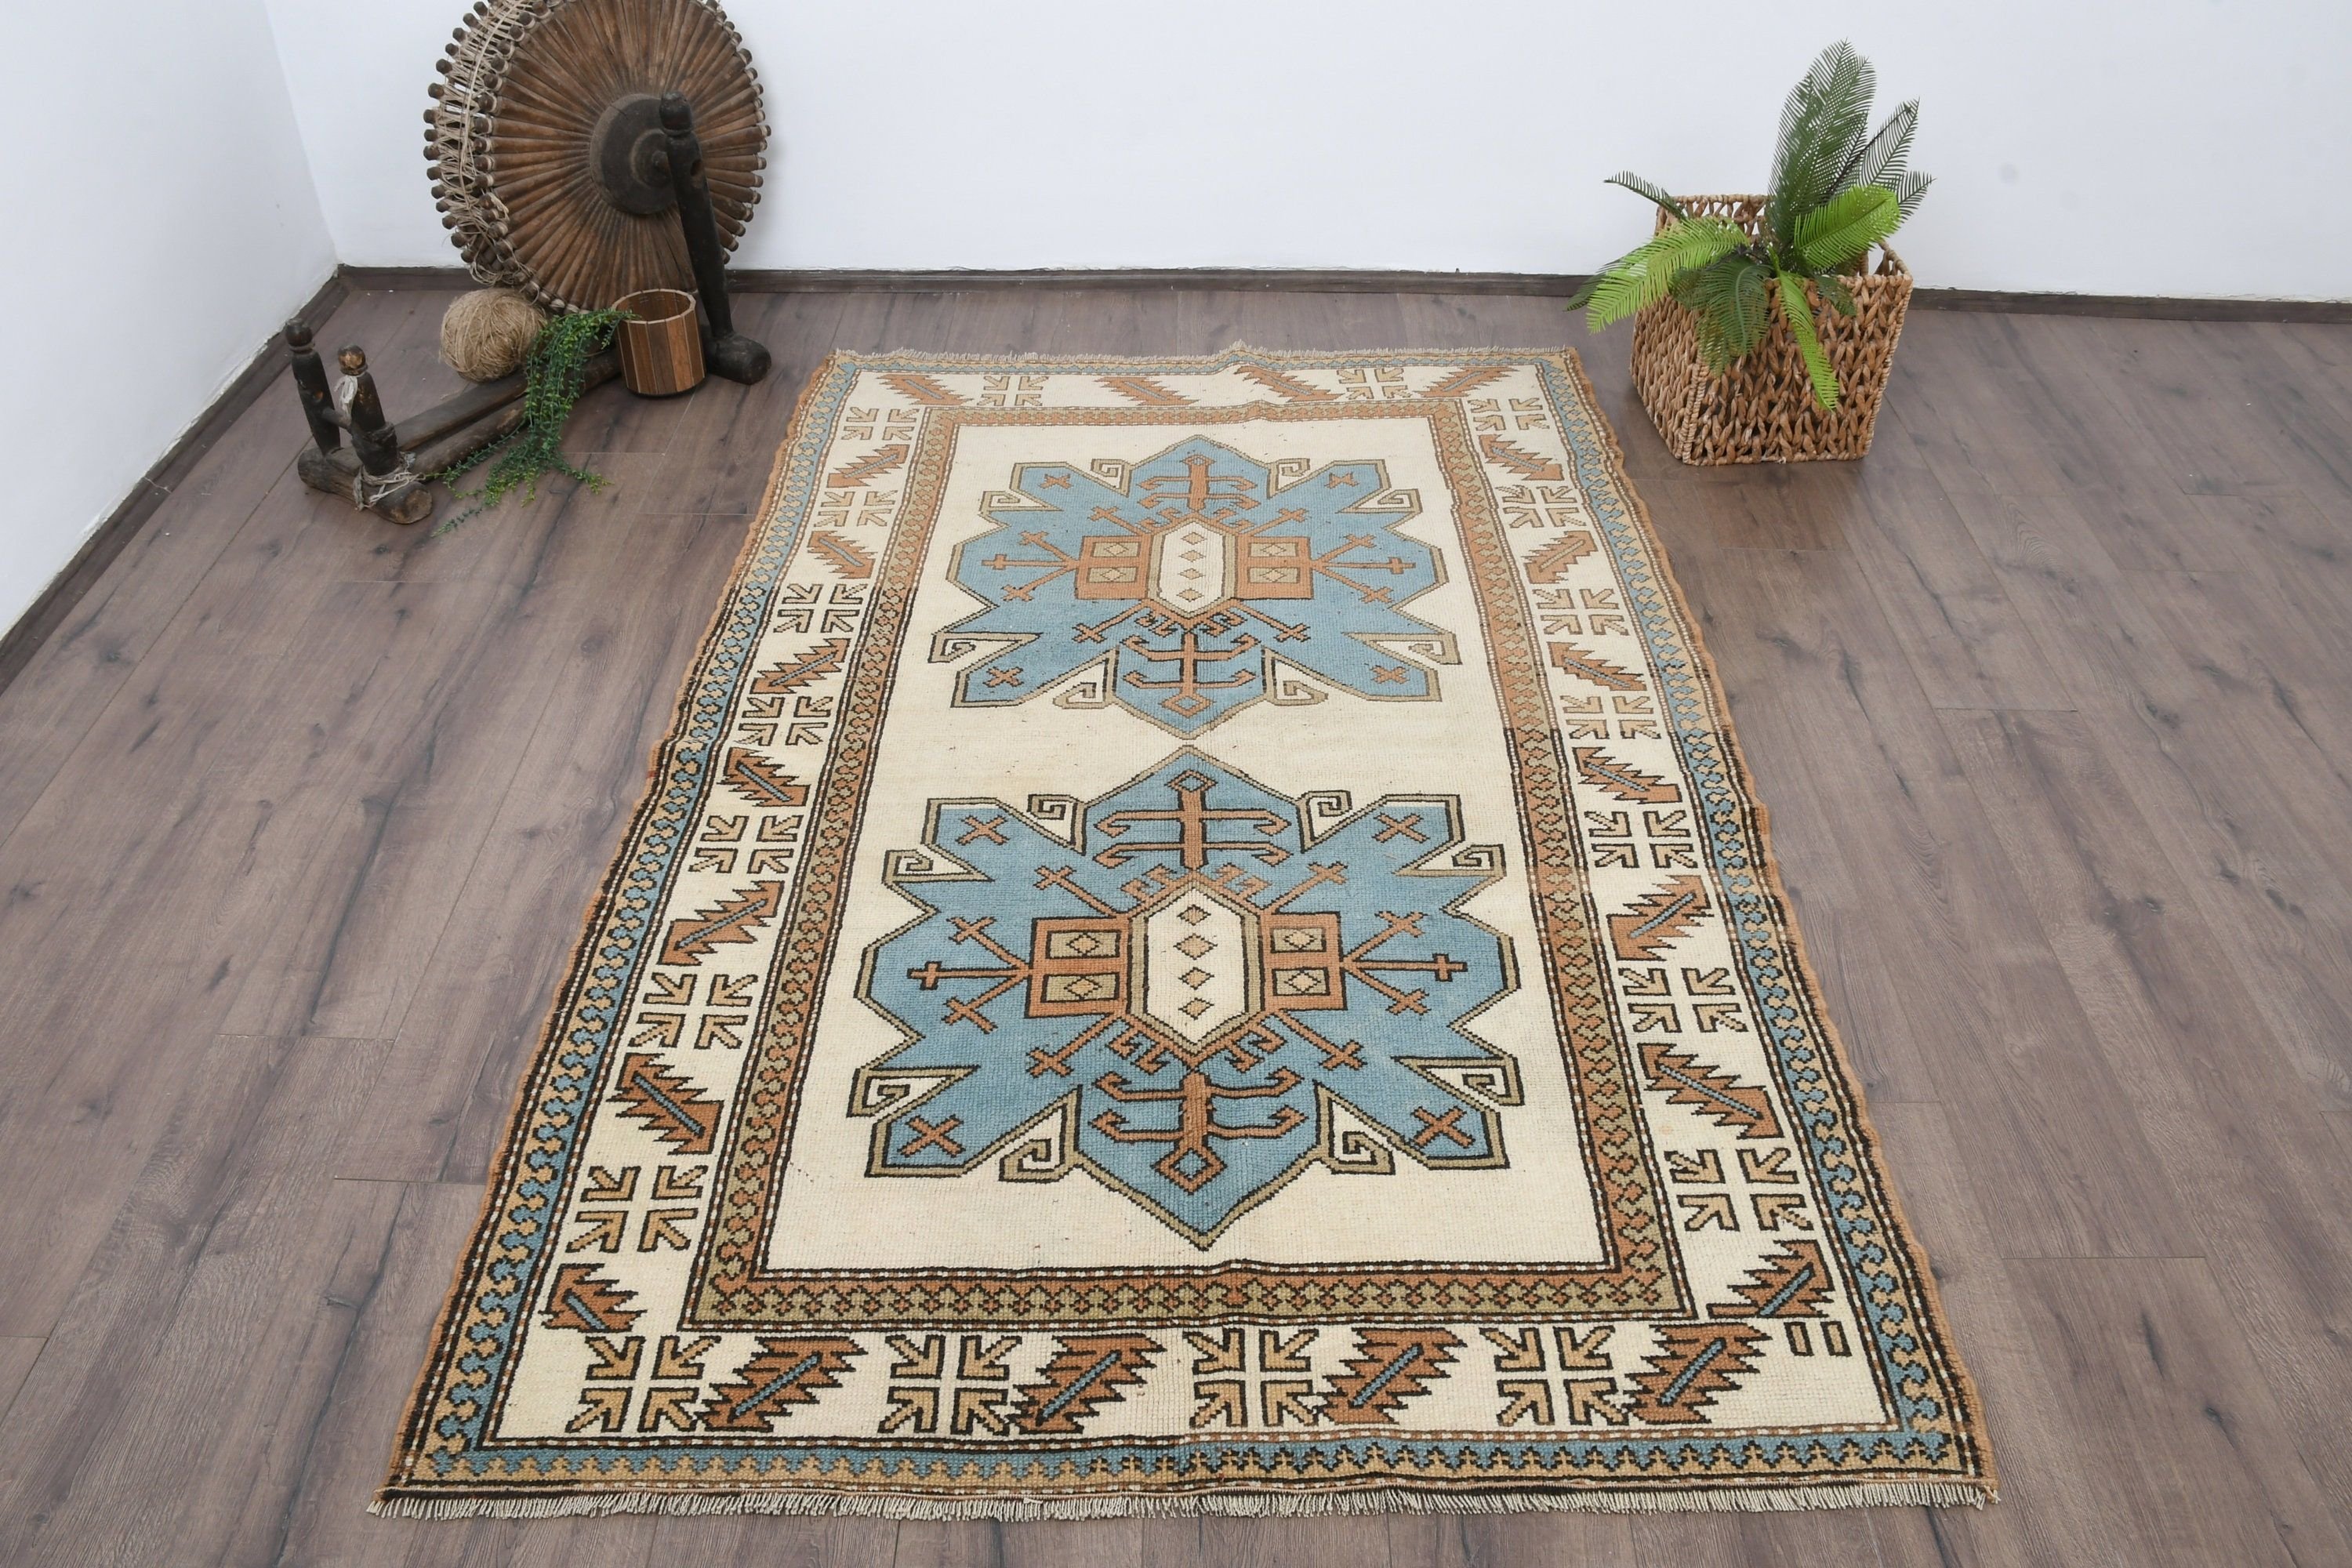 Oushak Rugs, Turkish Rug, Vintage Rugs, Indoor Rug, 4.3x6.6 ft Area Rug, Rugs for Kitchen, Brown Home Decor Rugs, Floor Rug, Antique Rugs